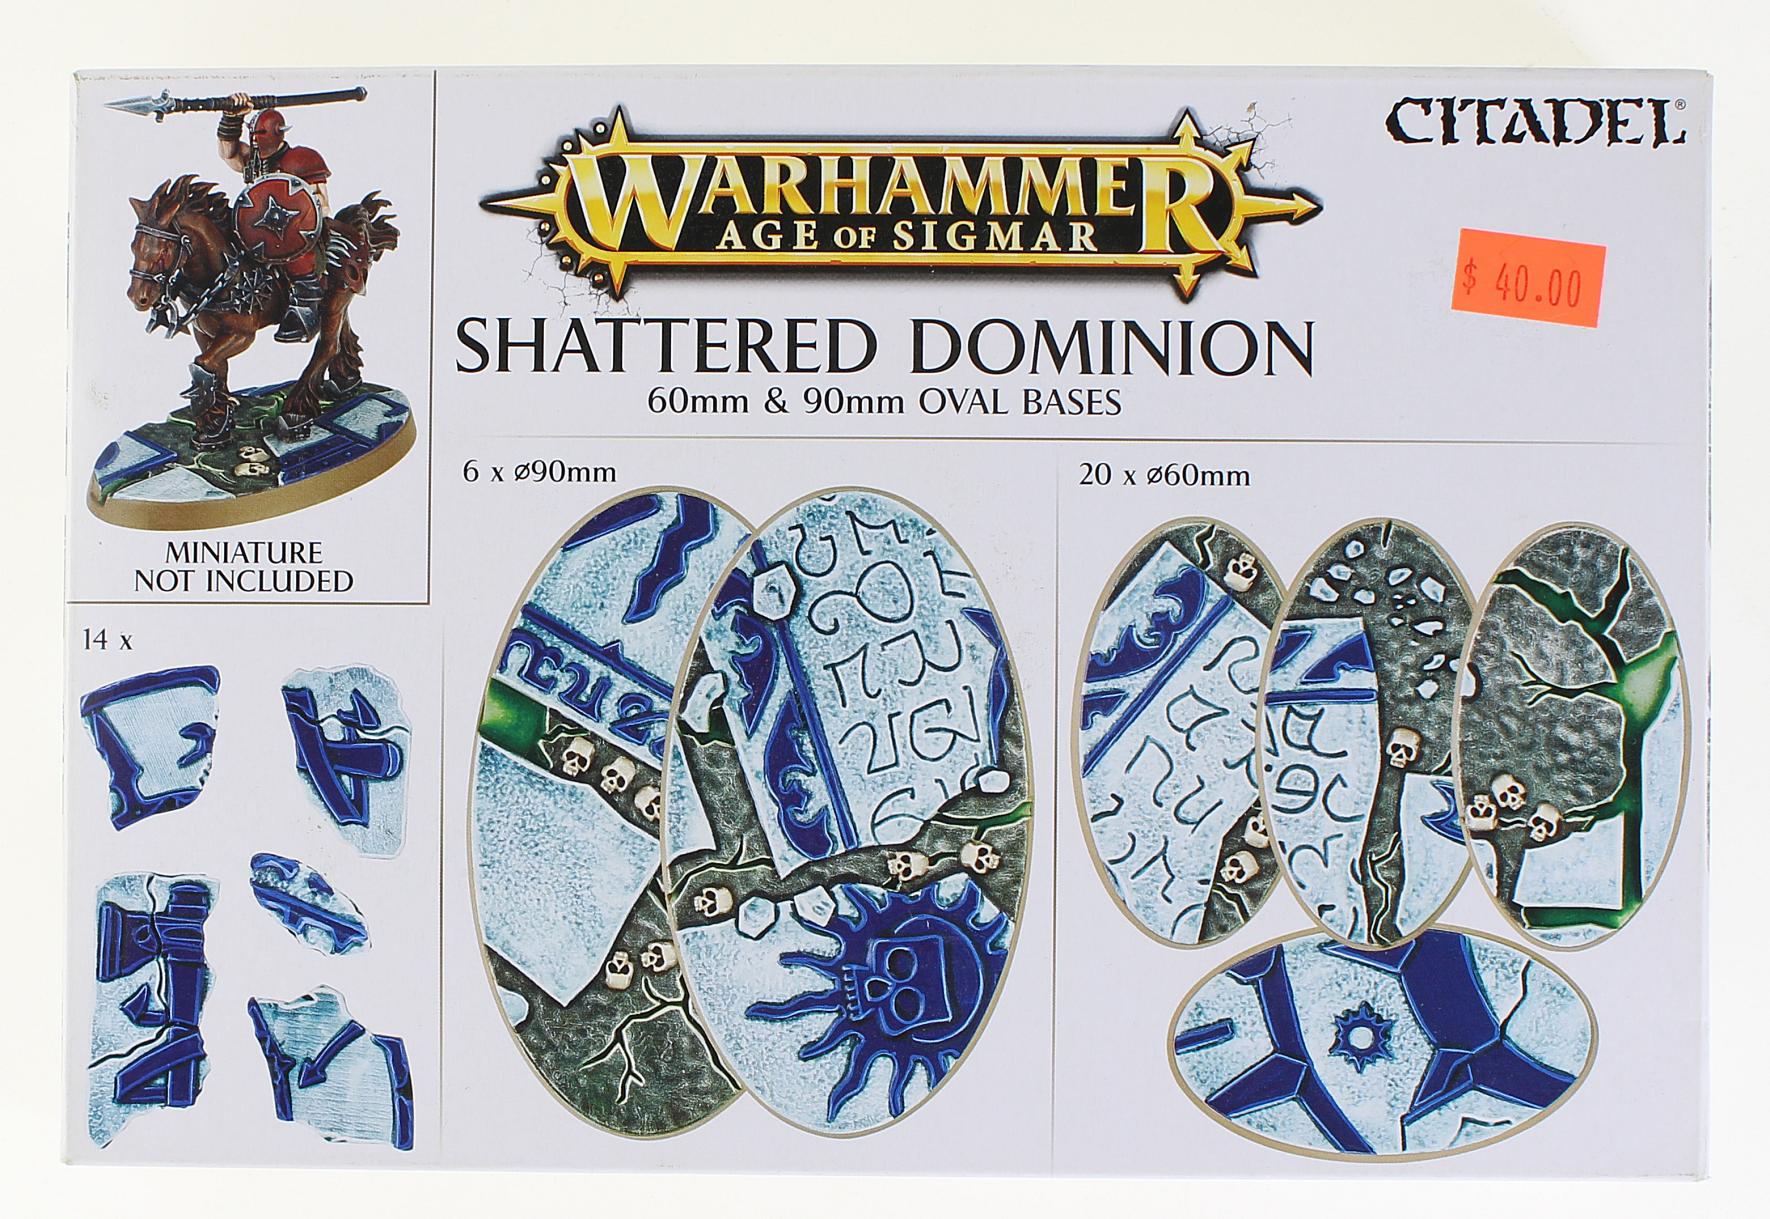 Warhammer Age of Sigmar: Shattered Dominion - 60 & 90mm Oval Bases